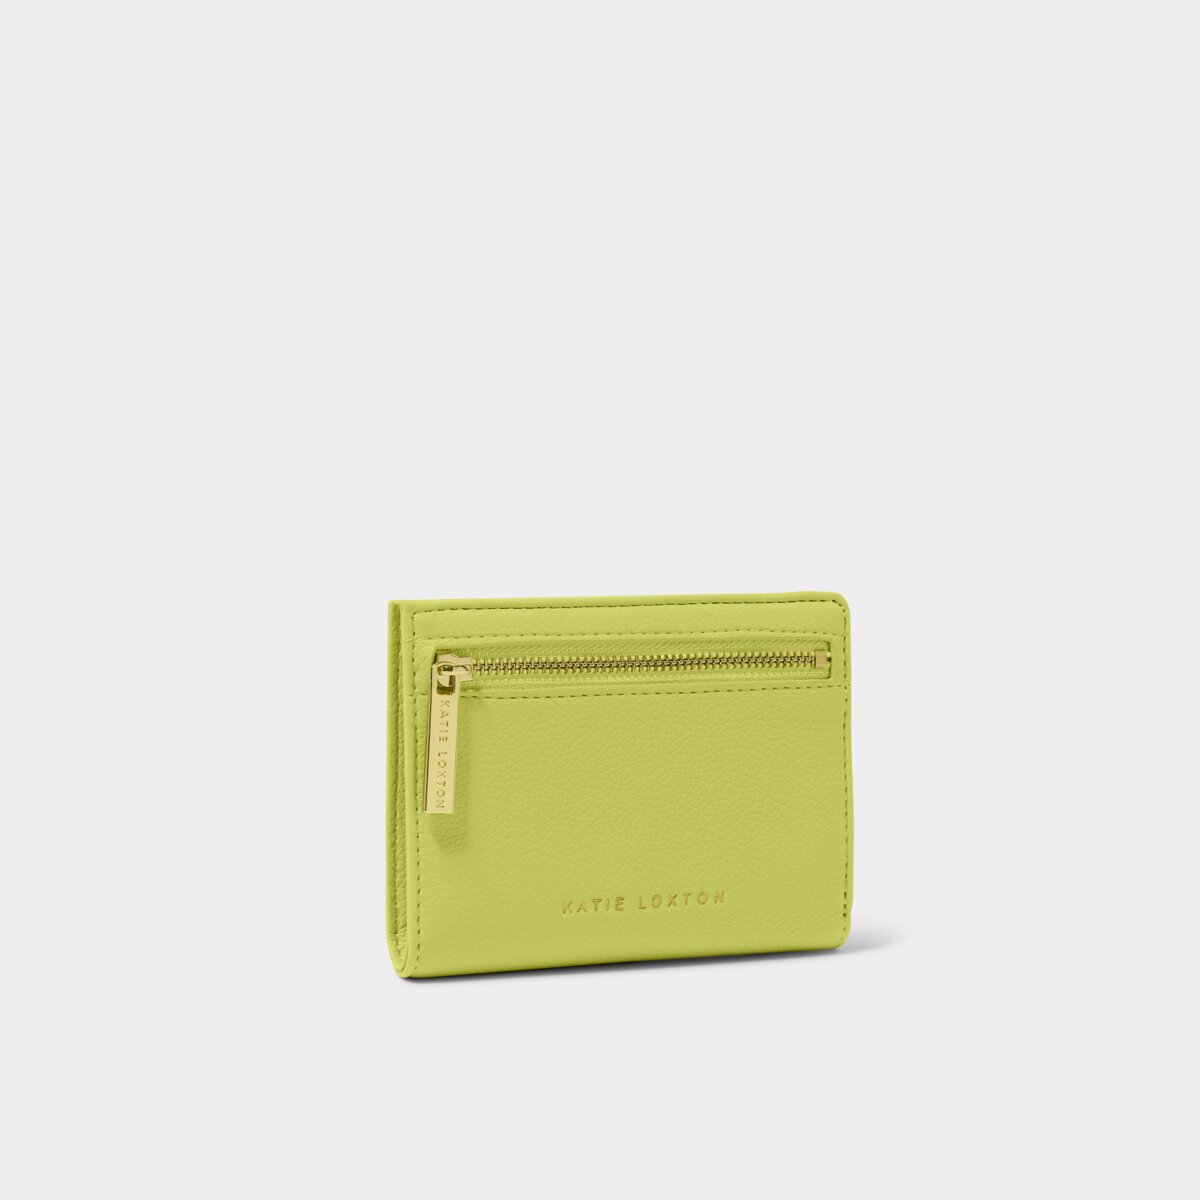 Katie Loxton Jayde purse in lime green. The purse is a small rectangle with a gold zipper. The picture is taken against a white background.